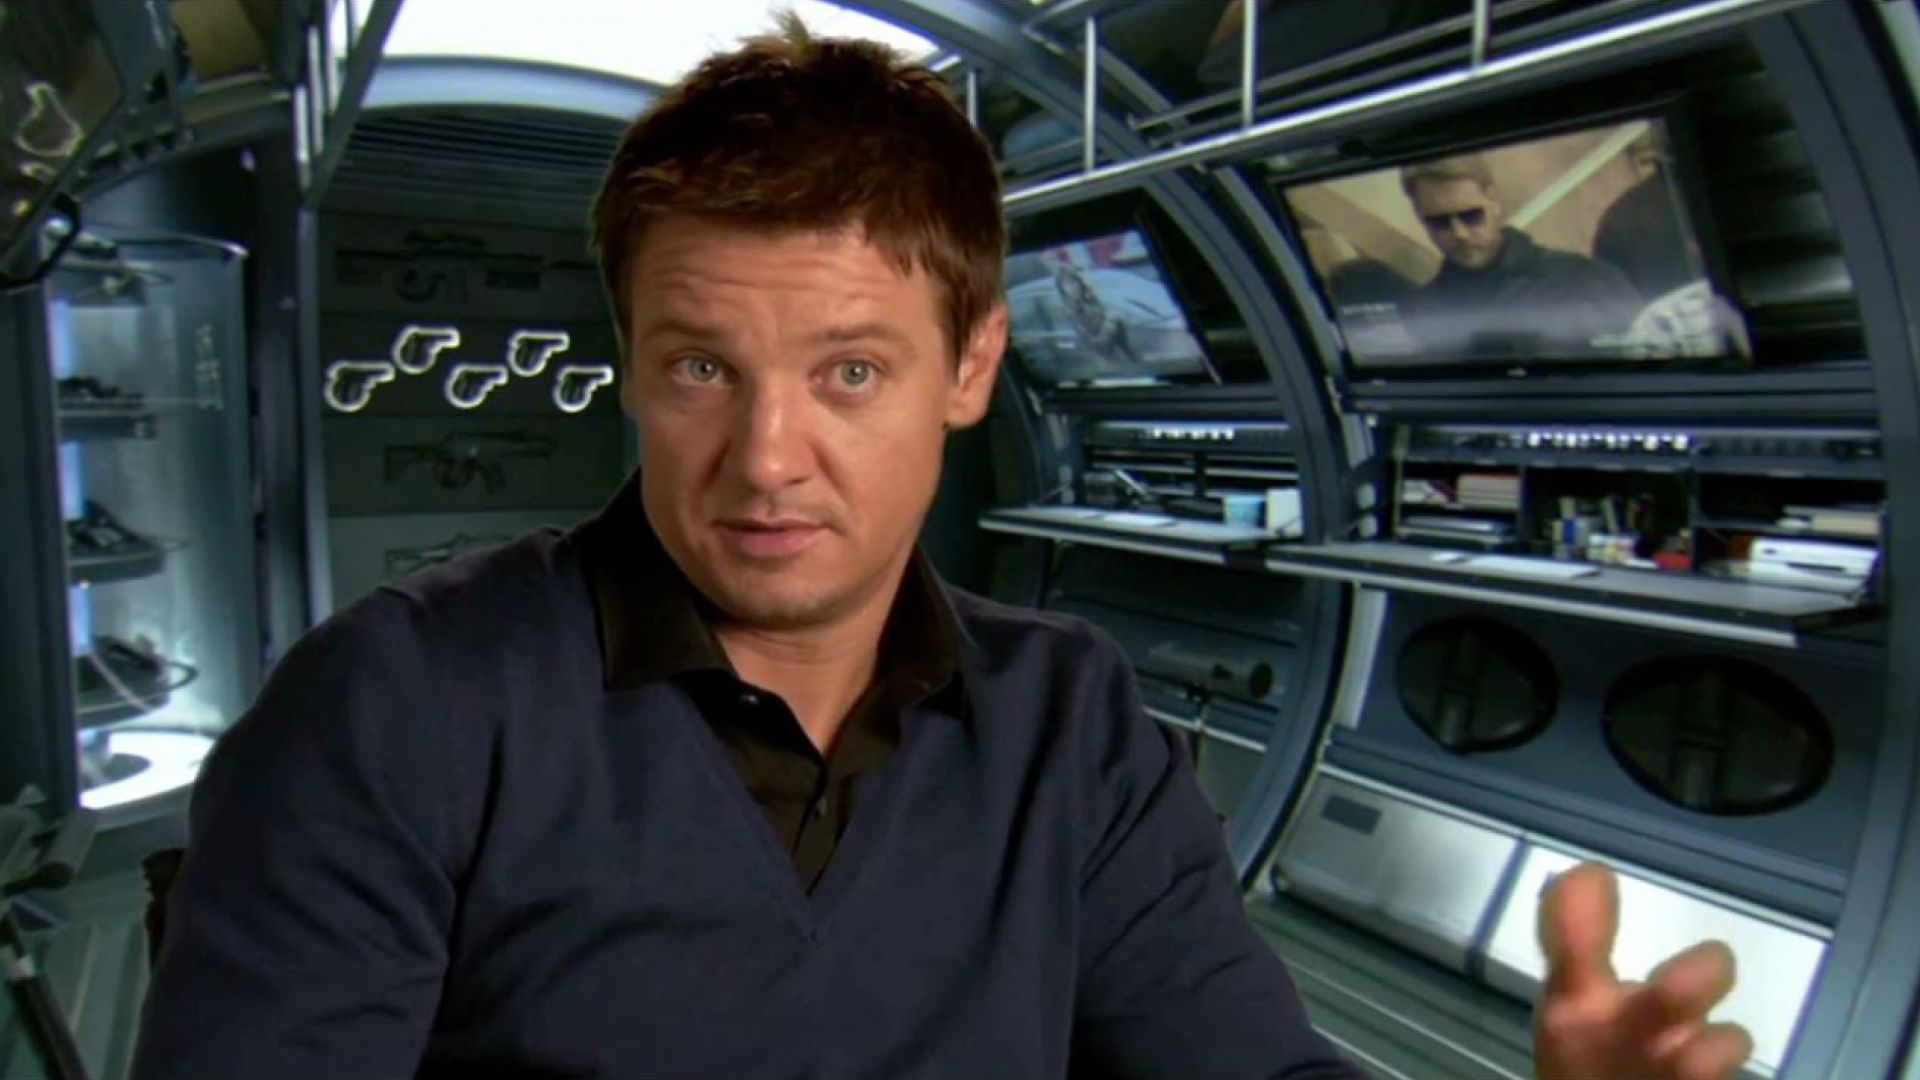 Jeremy Renner on director Brad Bird and jumping onto the fan in Mission: Impossible 4